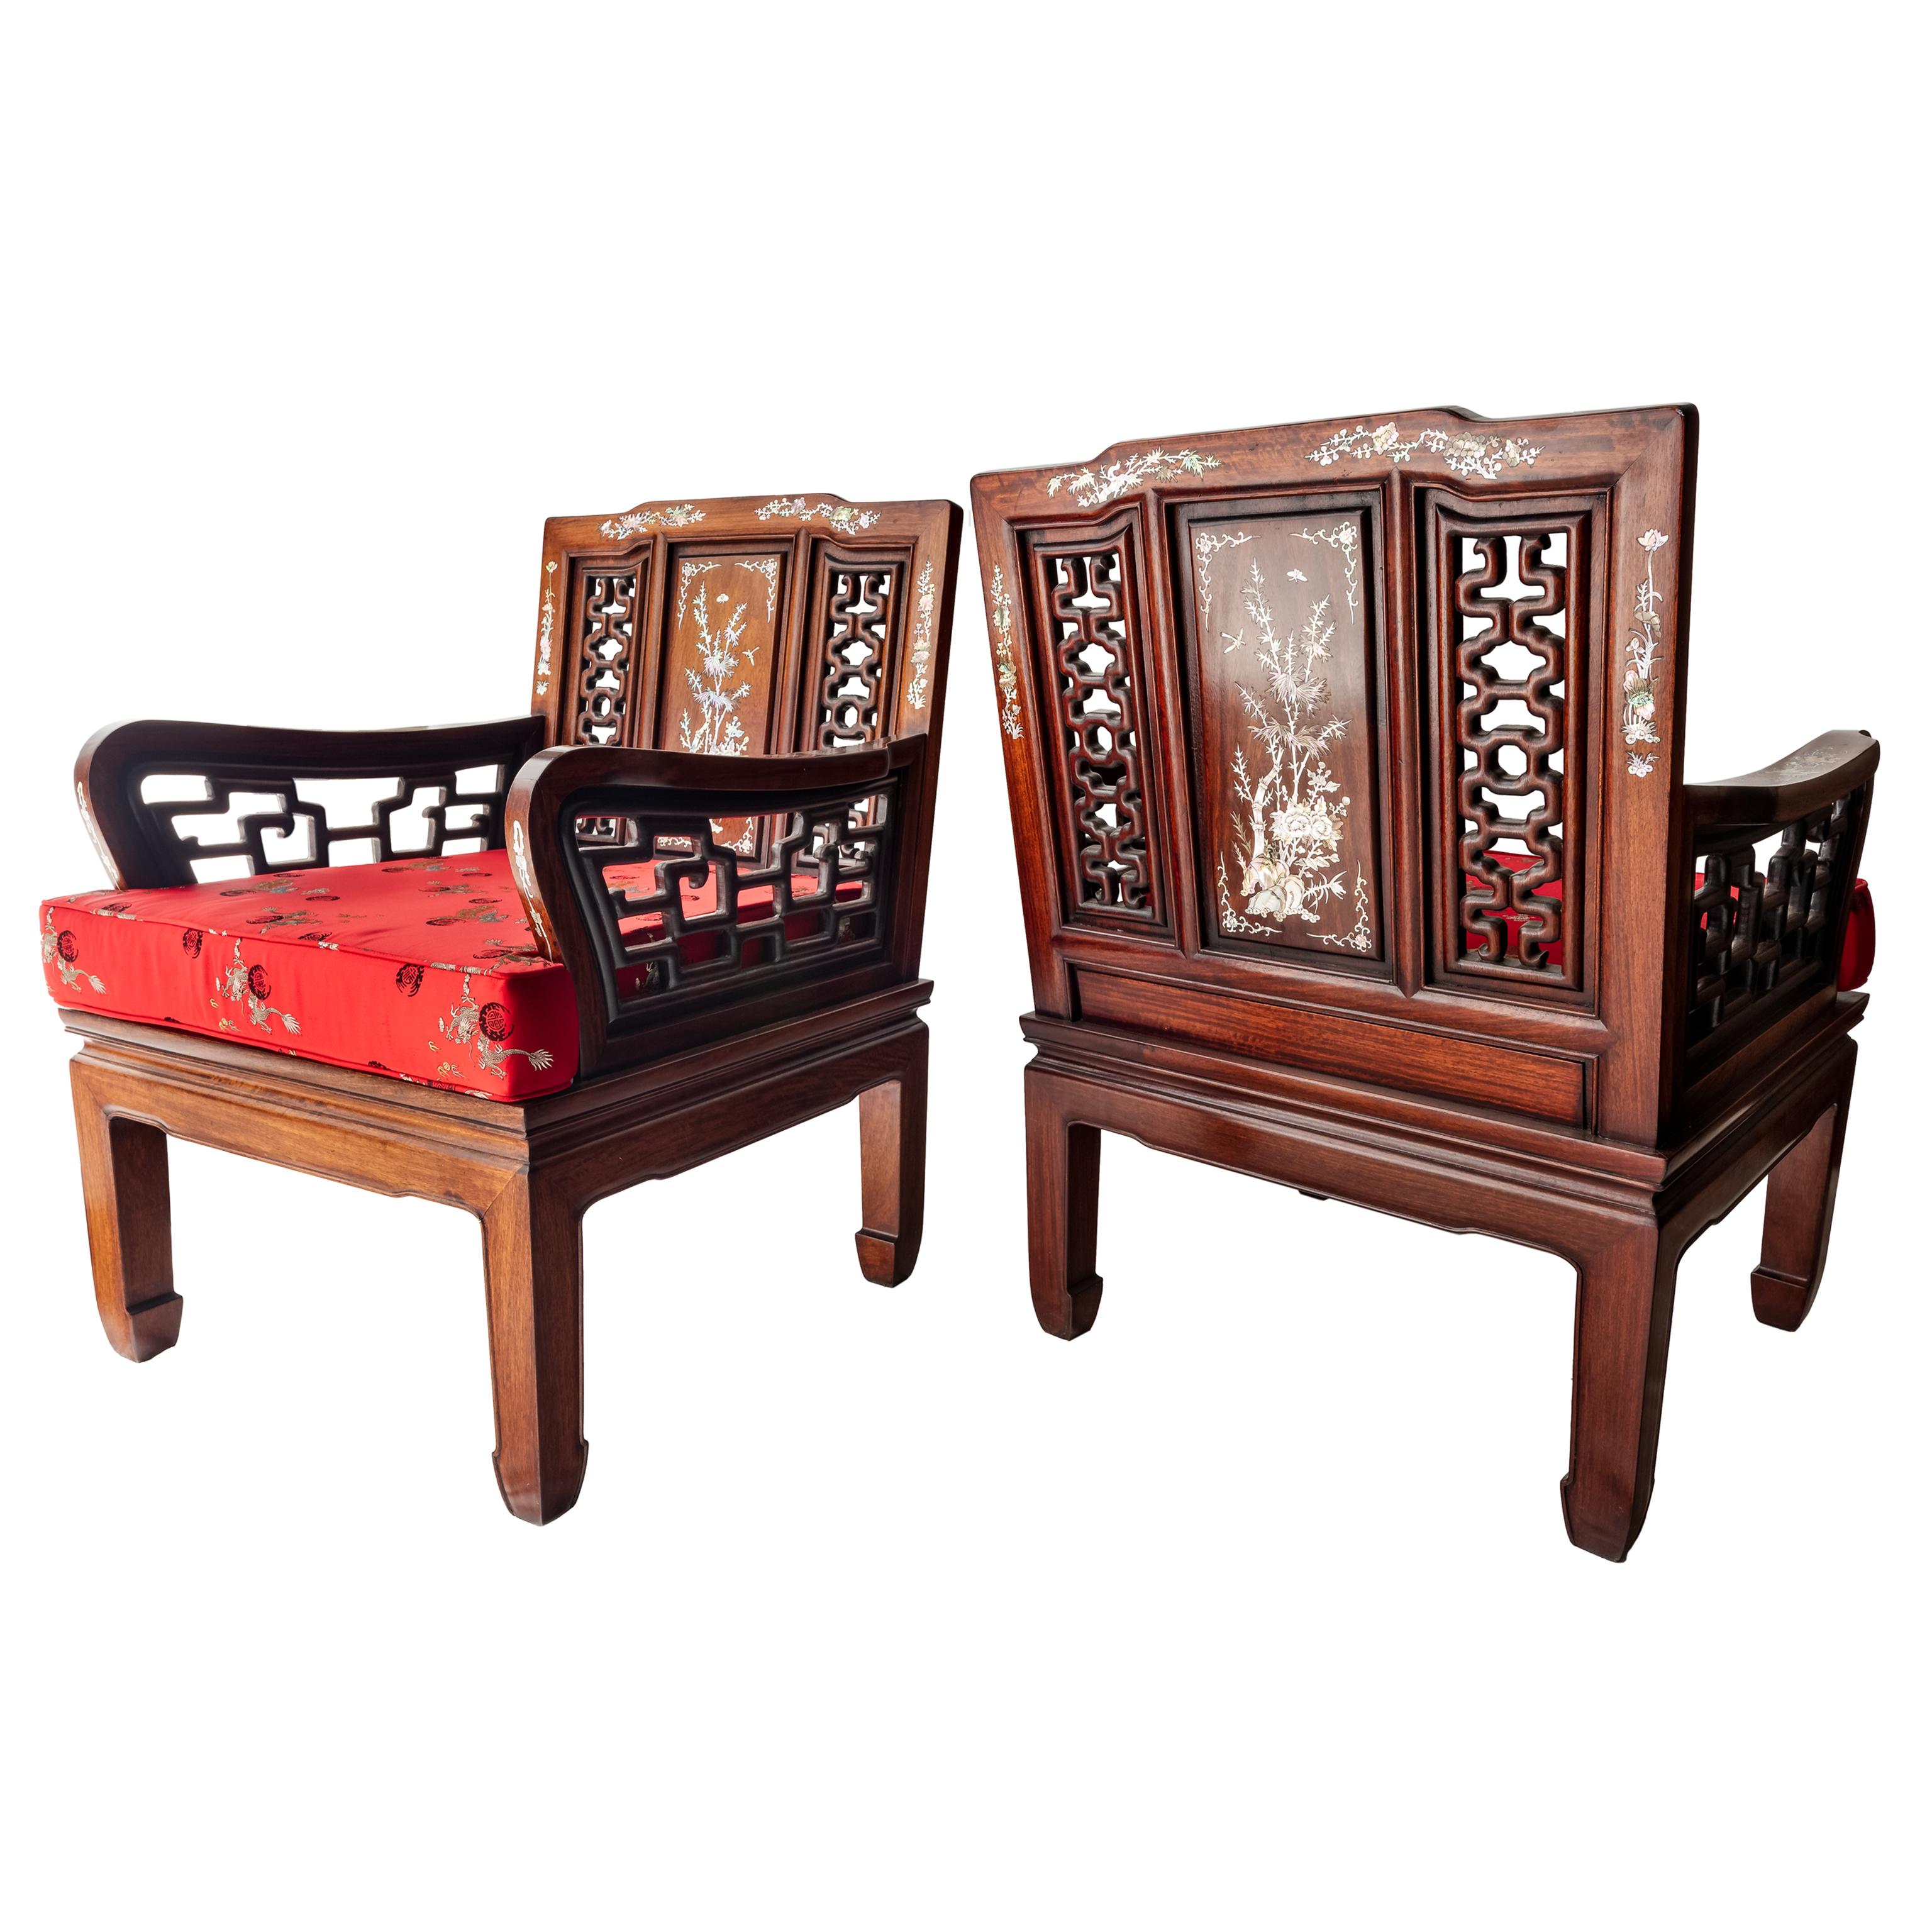 19th Century Indo-Portuguese Rosewood Mother of Pearl Inlay Lounge Chairs, 1890 (Portugiesisch)